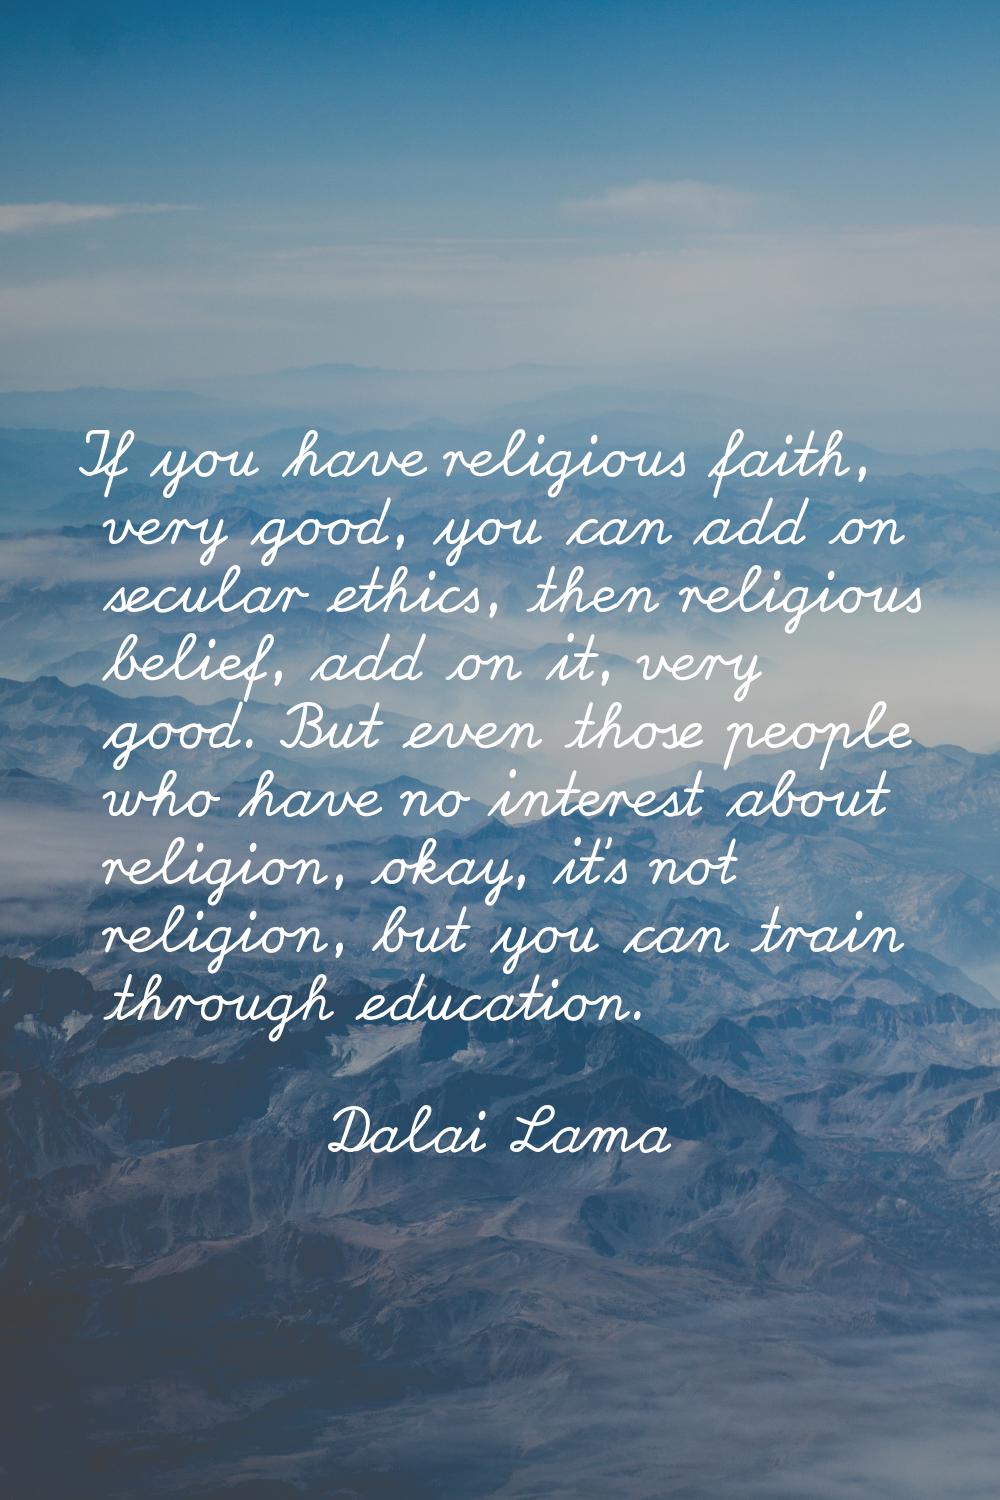 If you have religious faith, very good, you can add on secular ethics, then religious belief, add o